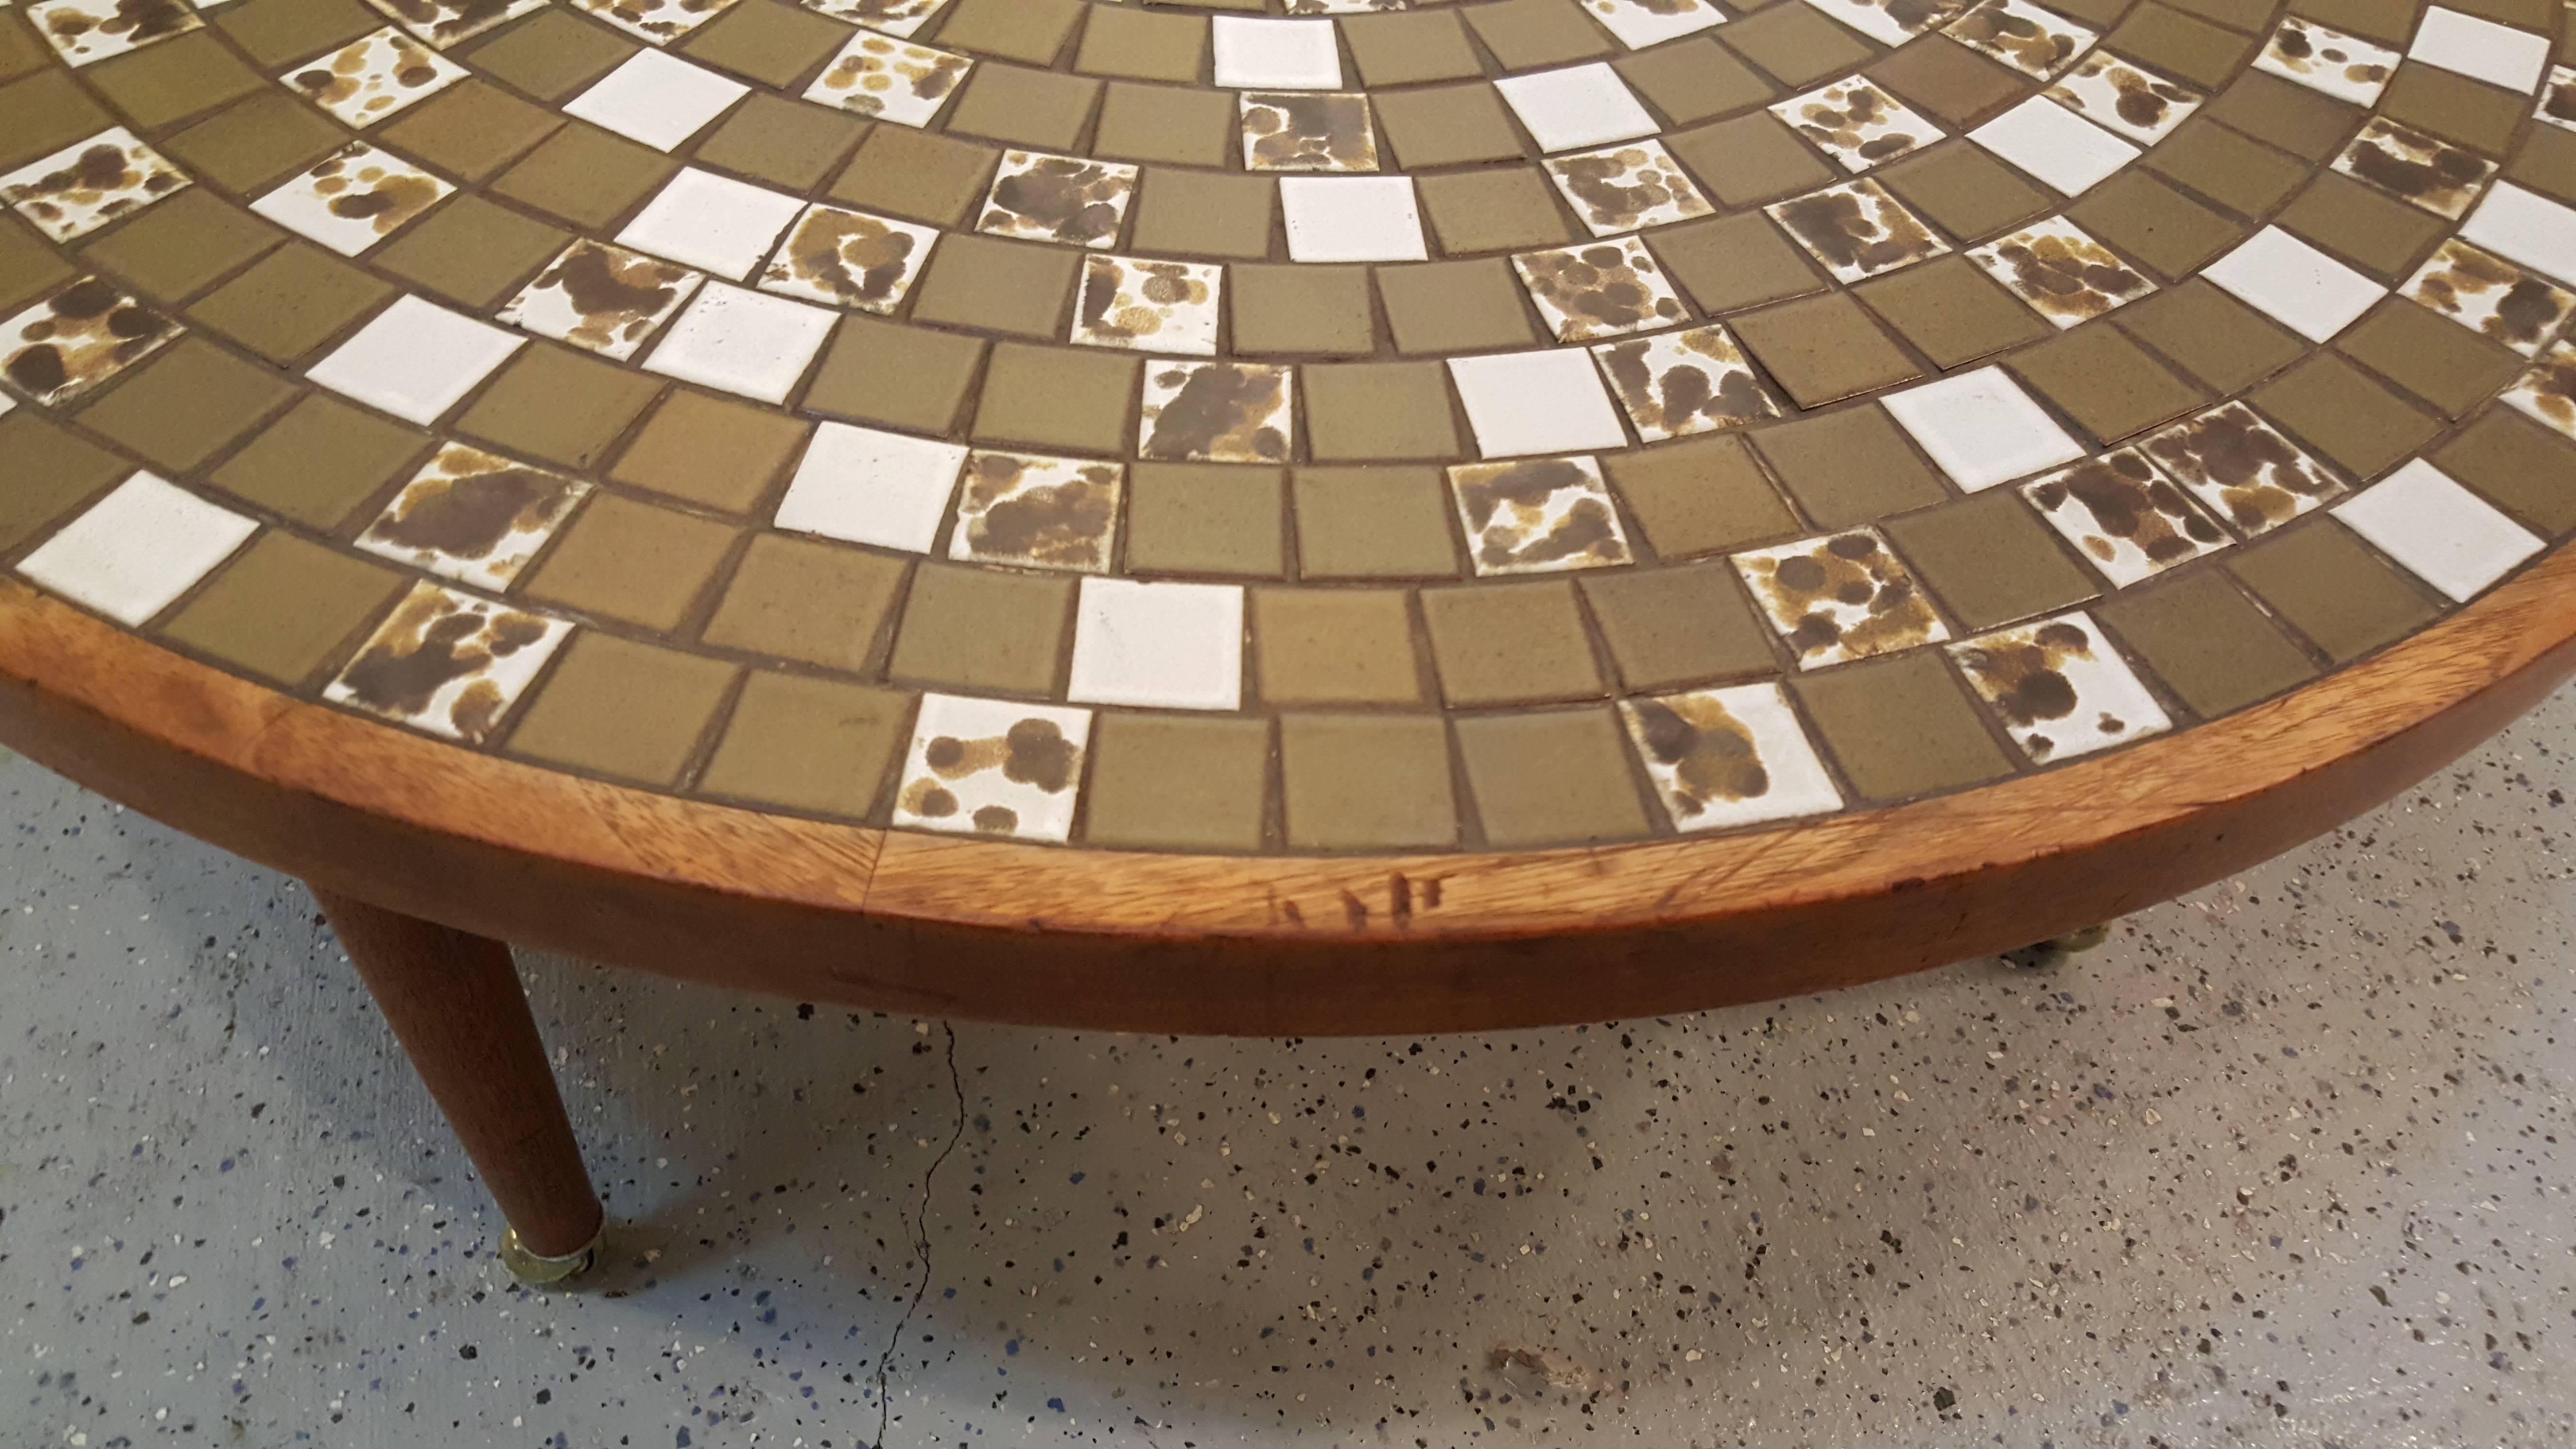 Mid-20th Century Circular Mosaic Tile Coffee Table by Gordon and Jane Martz For Sale